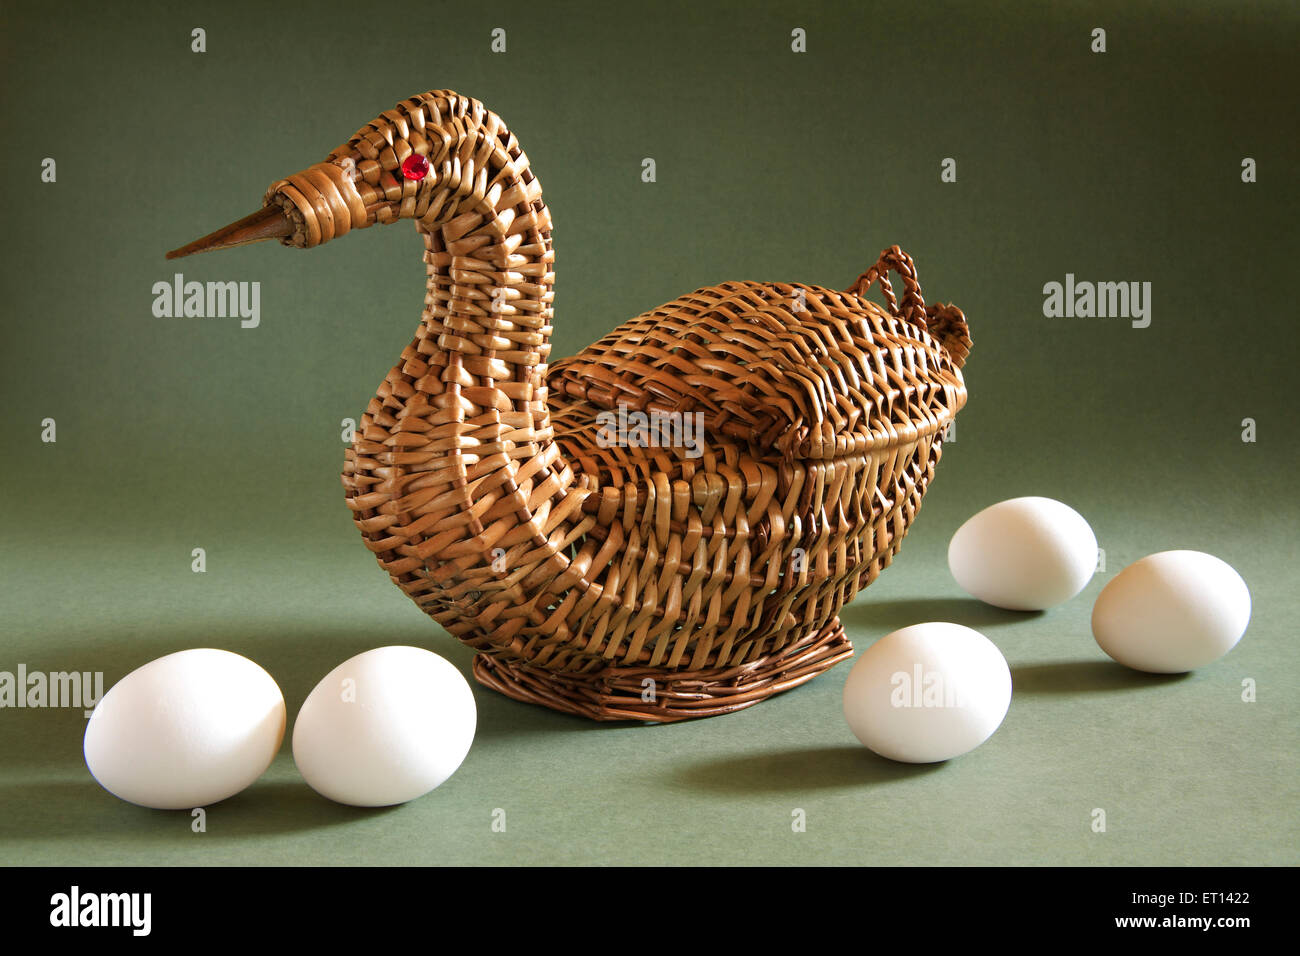 Artistic cane basket shape of duck with eggs on green background Stock Photo